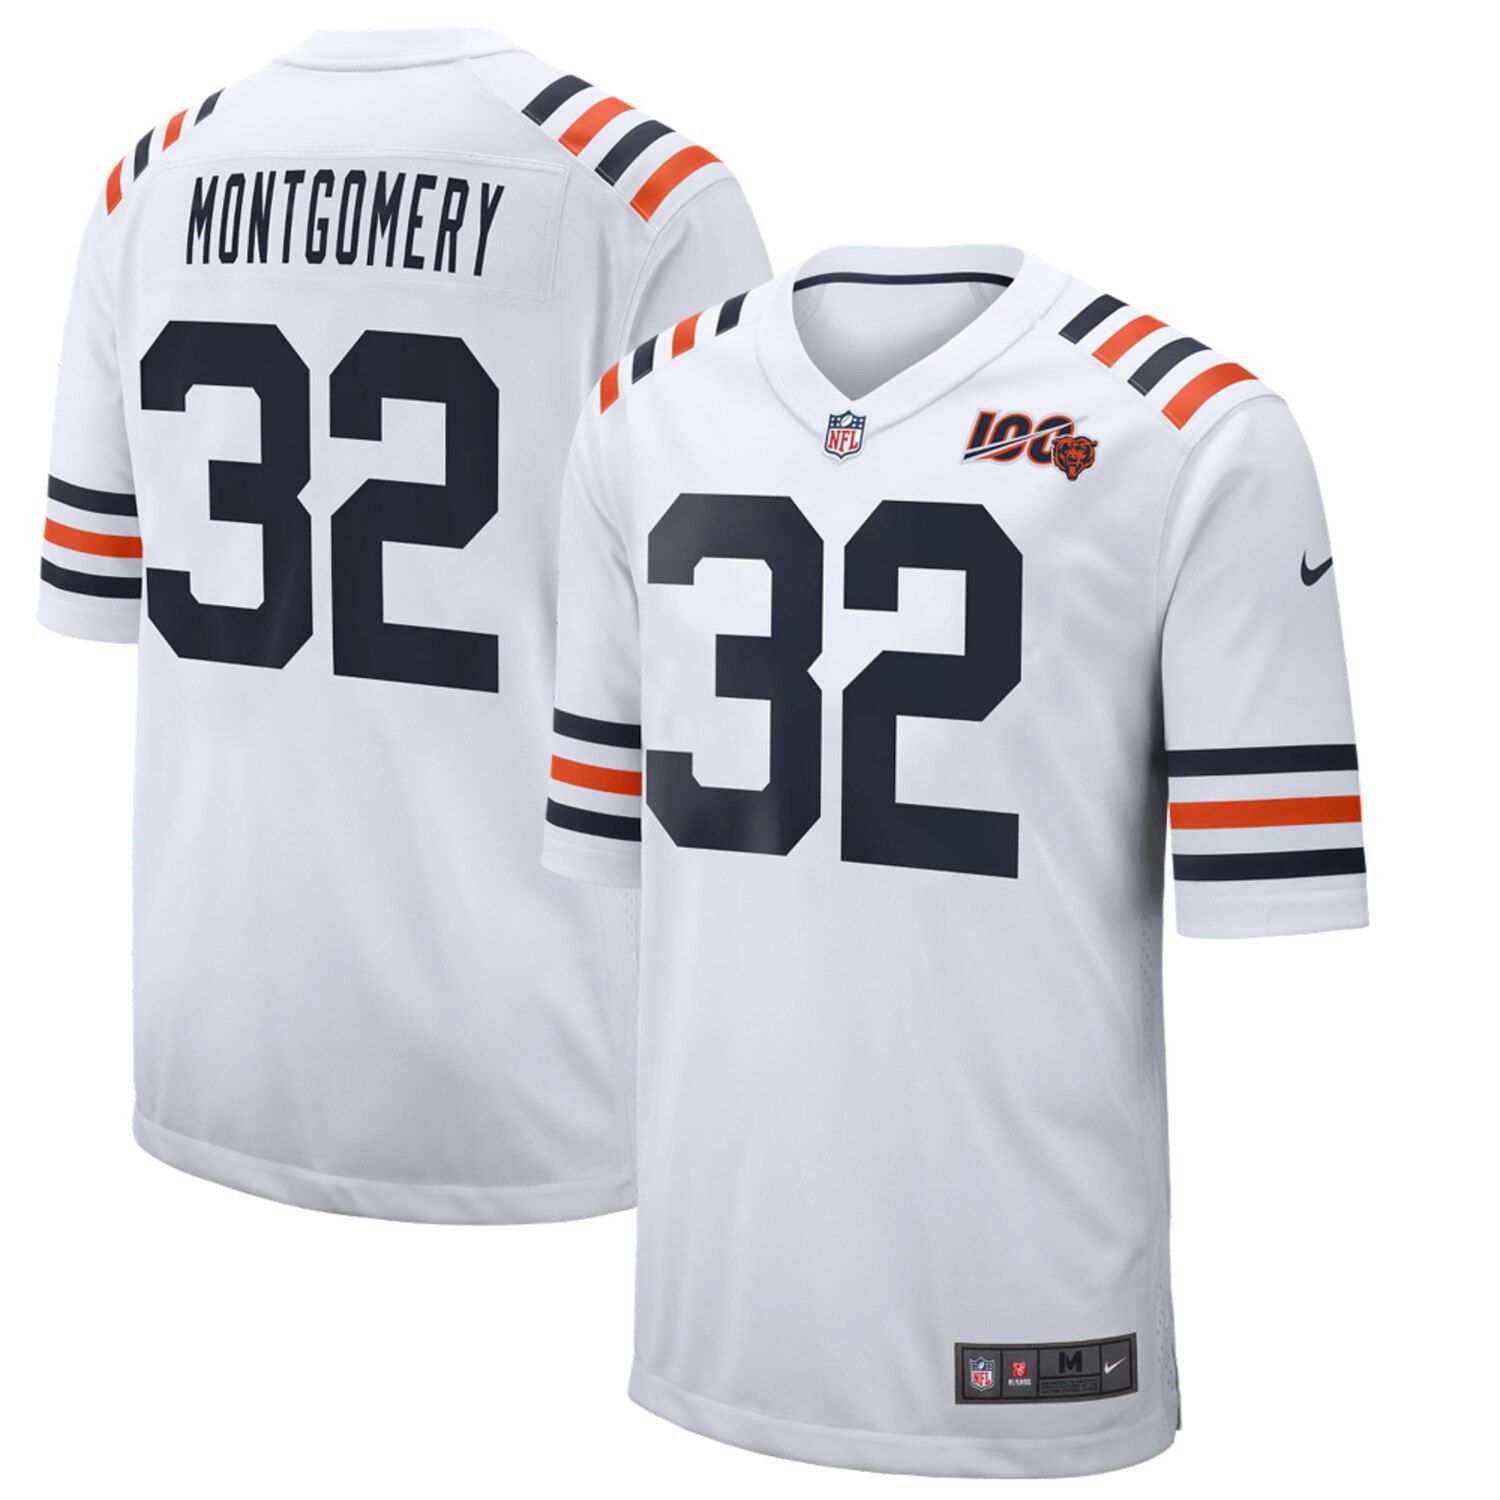 chicago bears classic jersey